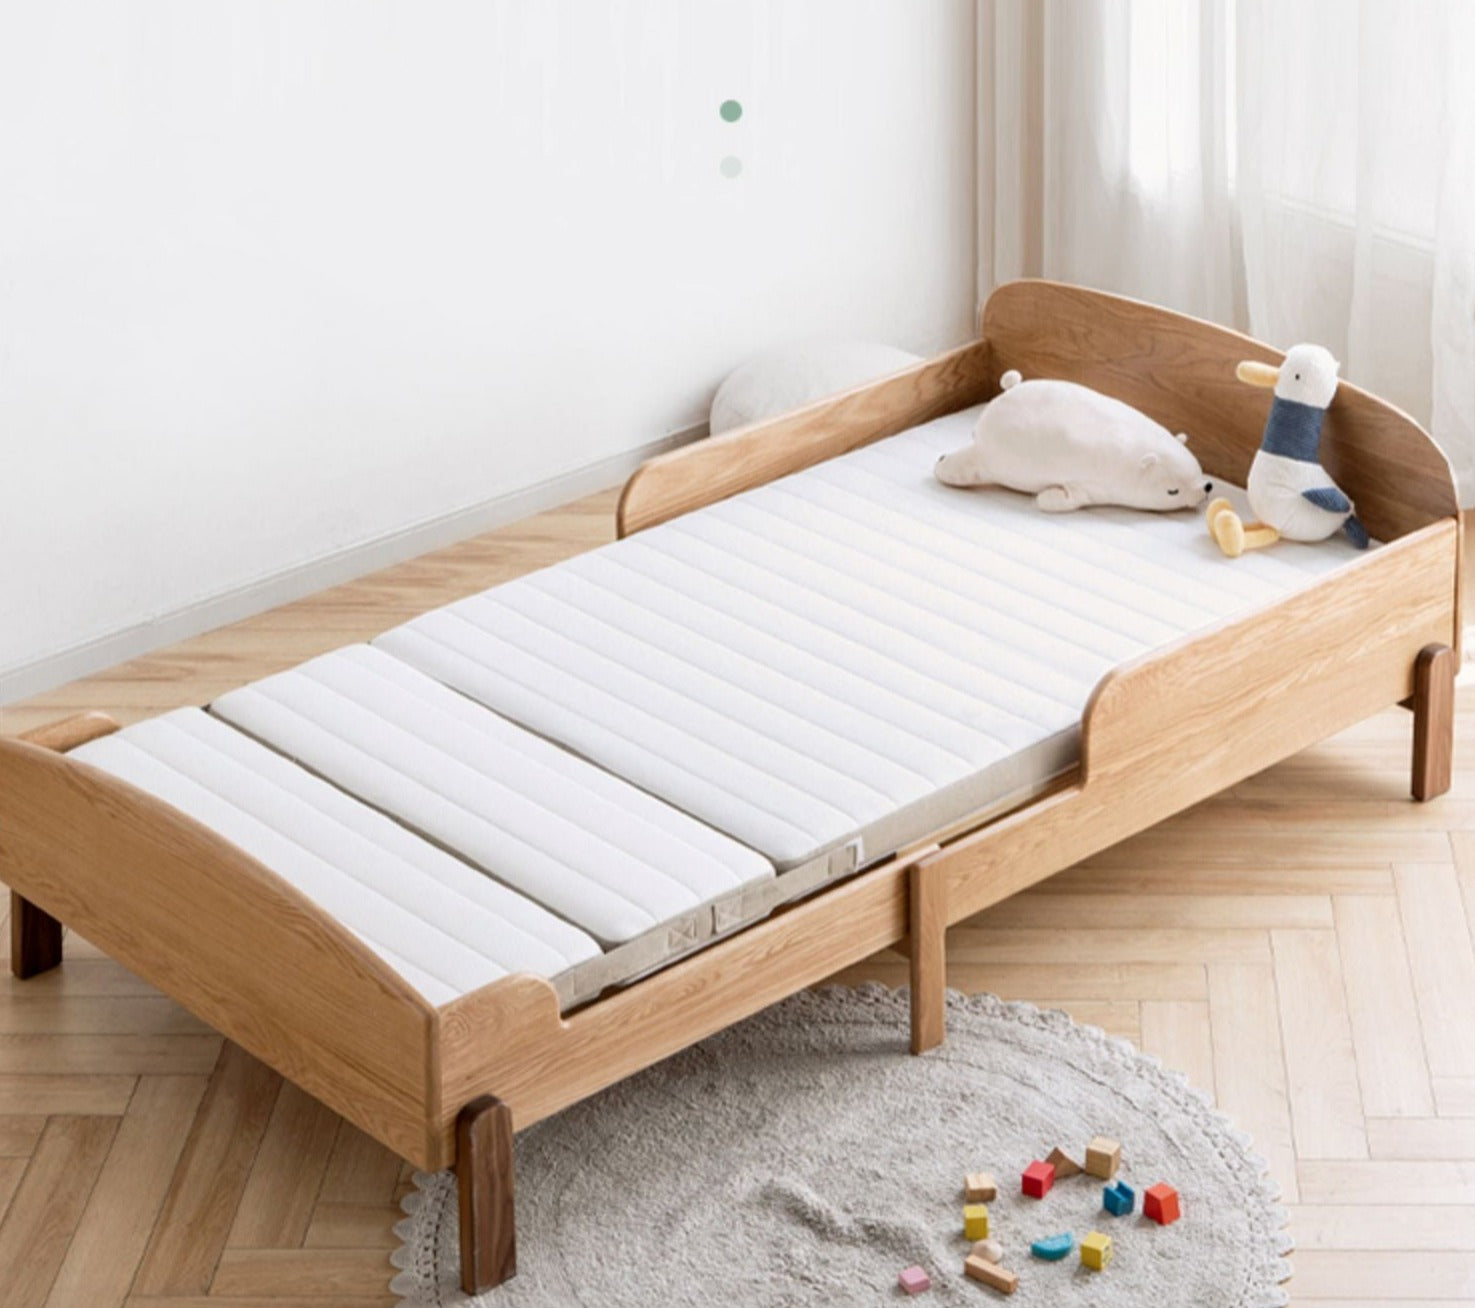 Foldable coconut palm Antibacterial and anti-mite tri-fold kids mattress 3.15 in (8 cm)